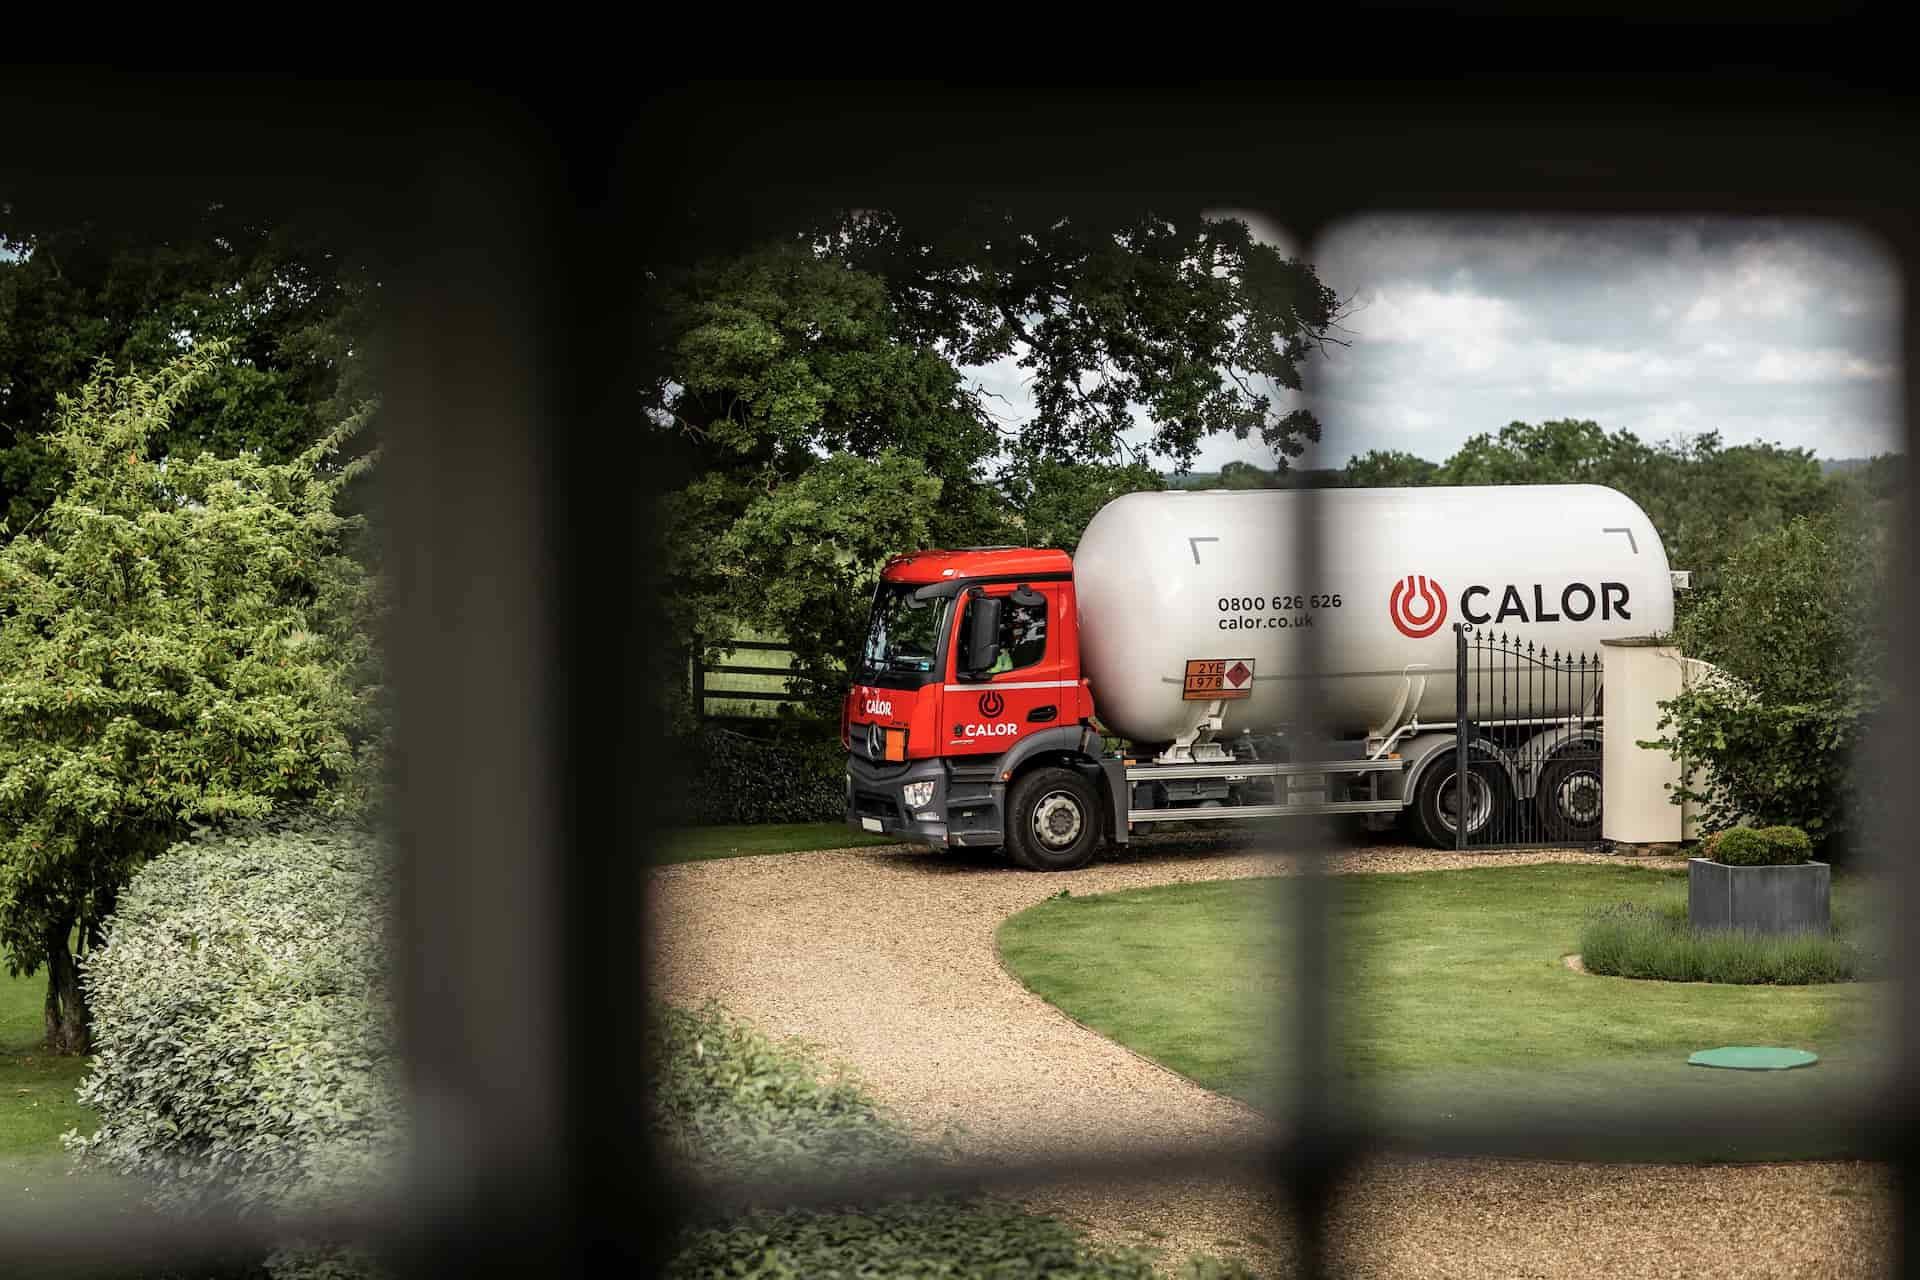 Calor gas delivery vehicle about to deliver the LPG